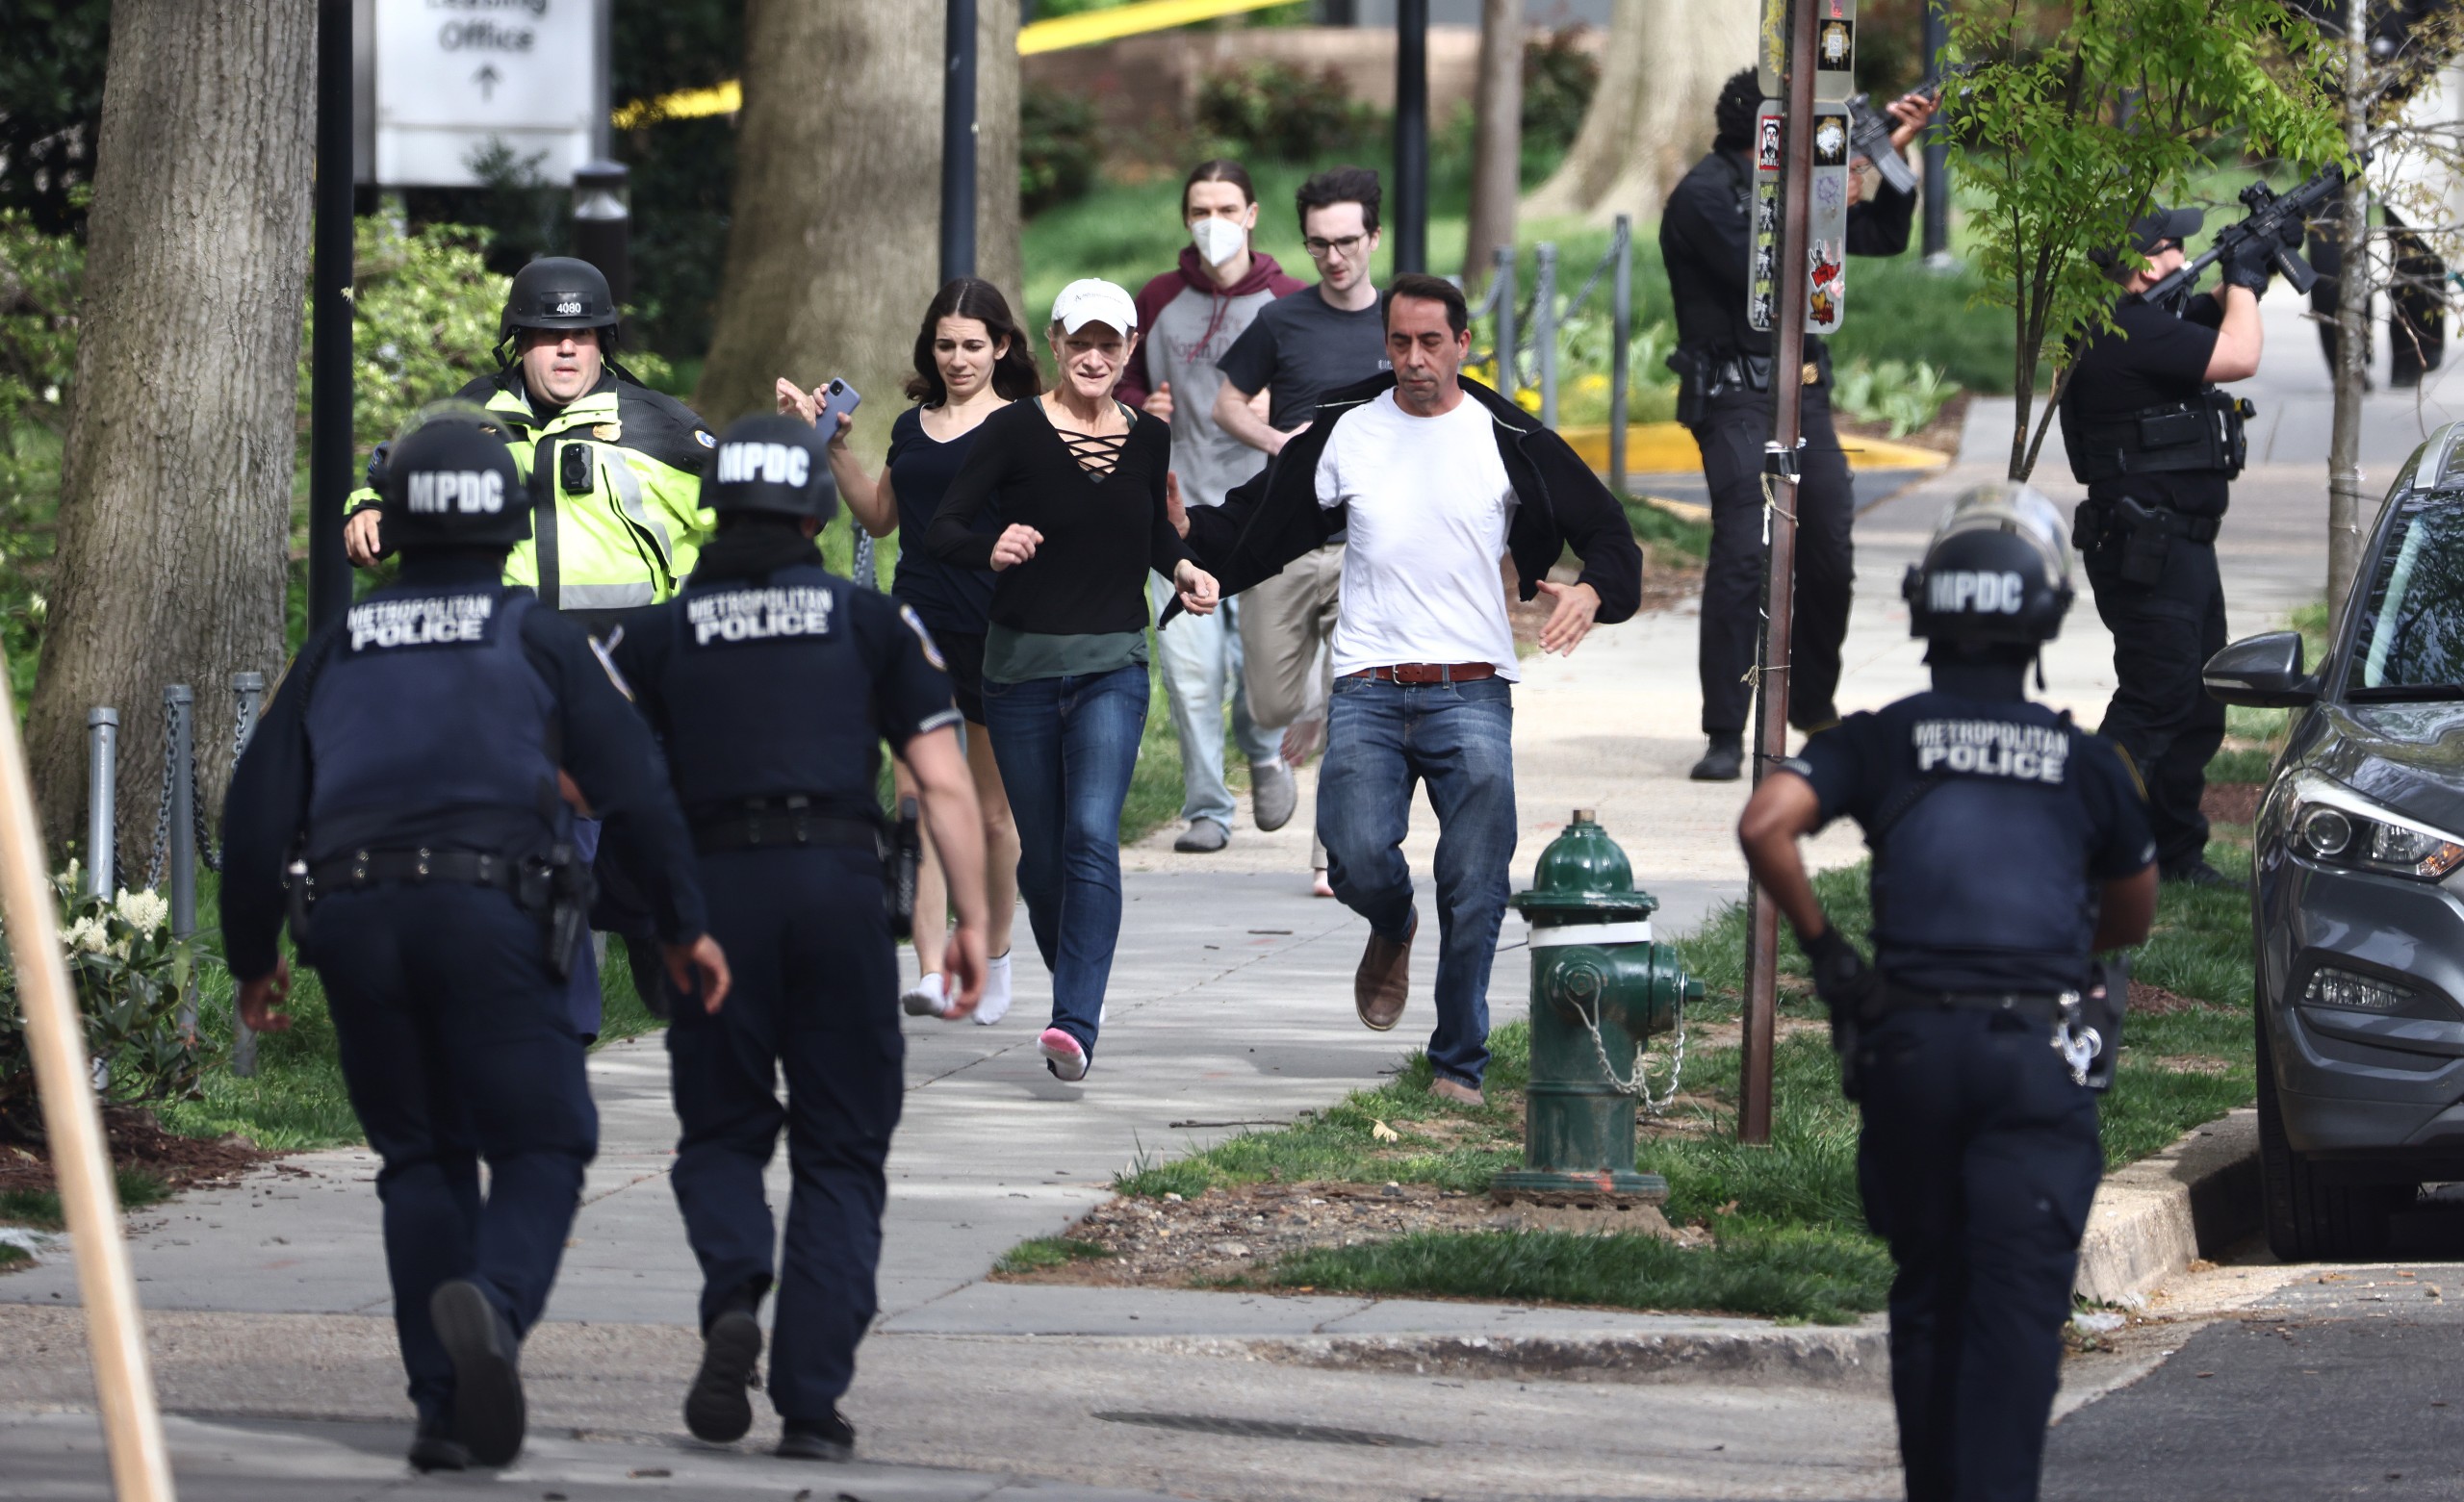 epaselect epa09903332 People are escorted to safety as Washington DC Metropolitan Police and US Secret Service investigate at the scene of a reported shooting near the Edmund Burke School in Northwest Washington, DC, USA, 22 April 2022.  EPA/JIM LO SCALZO